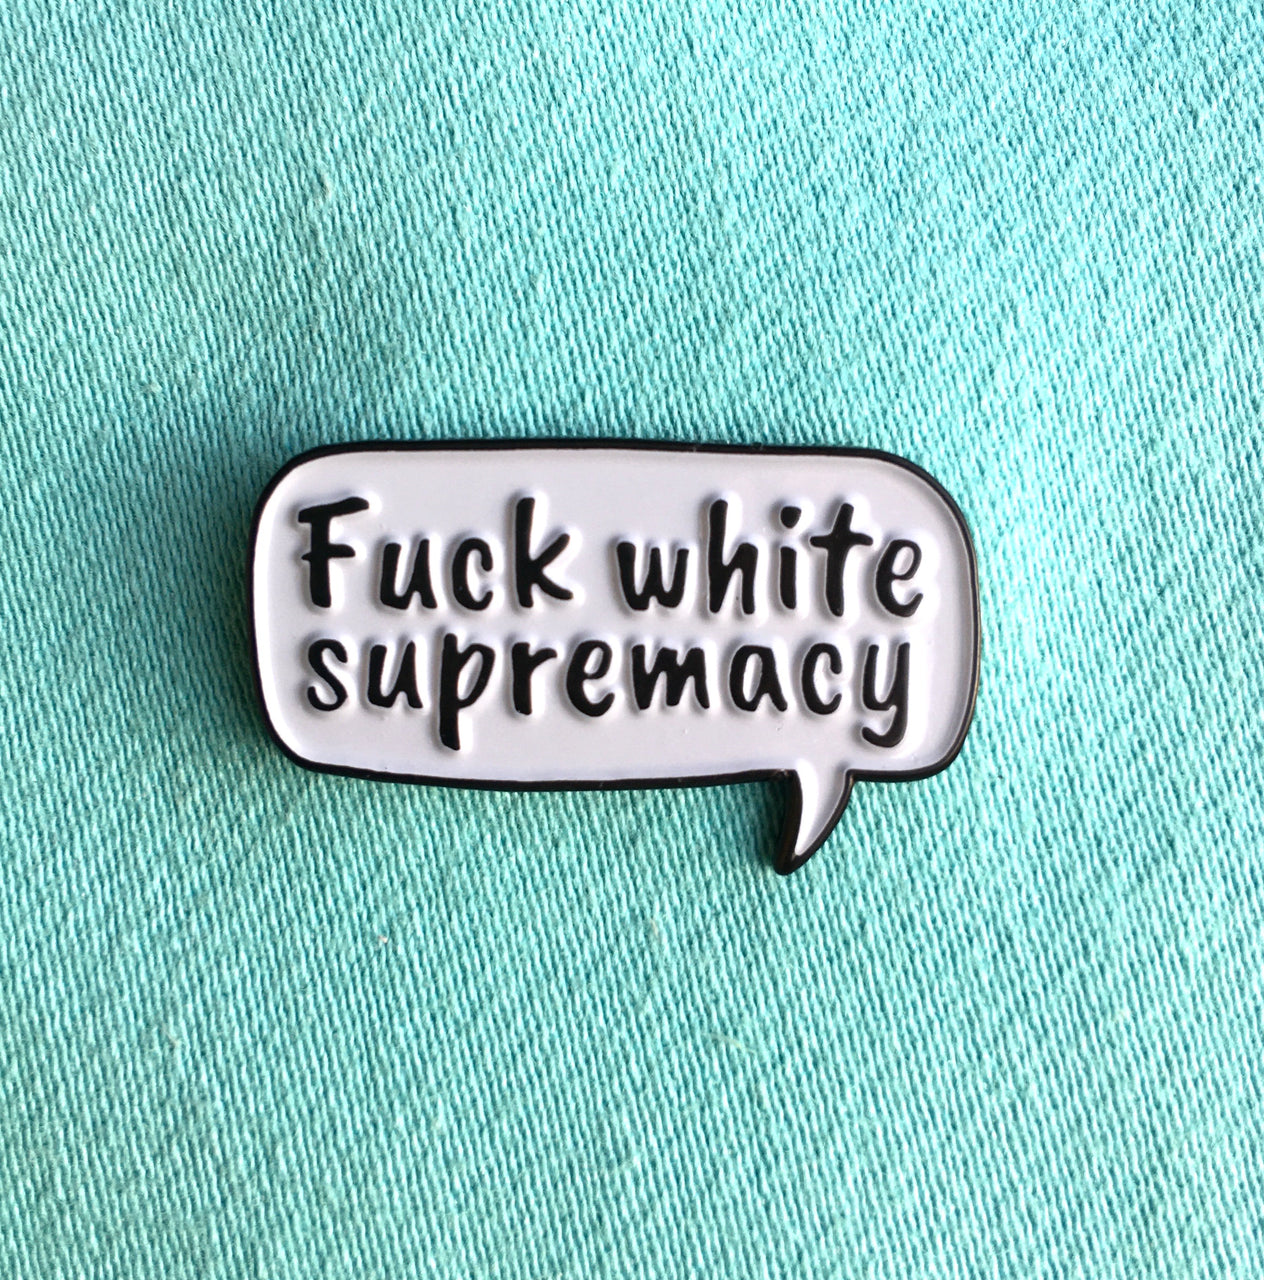 Fuck white supremacy - Radical Buttons